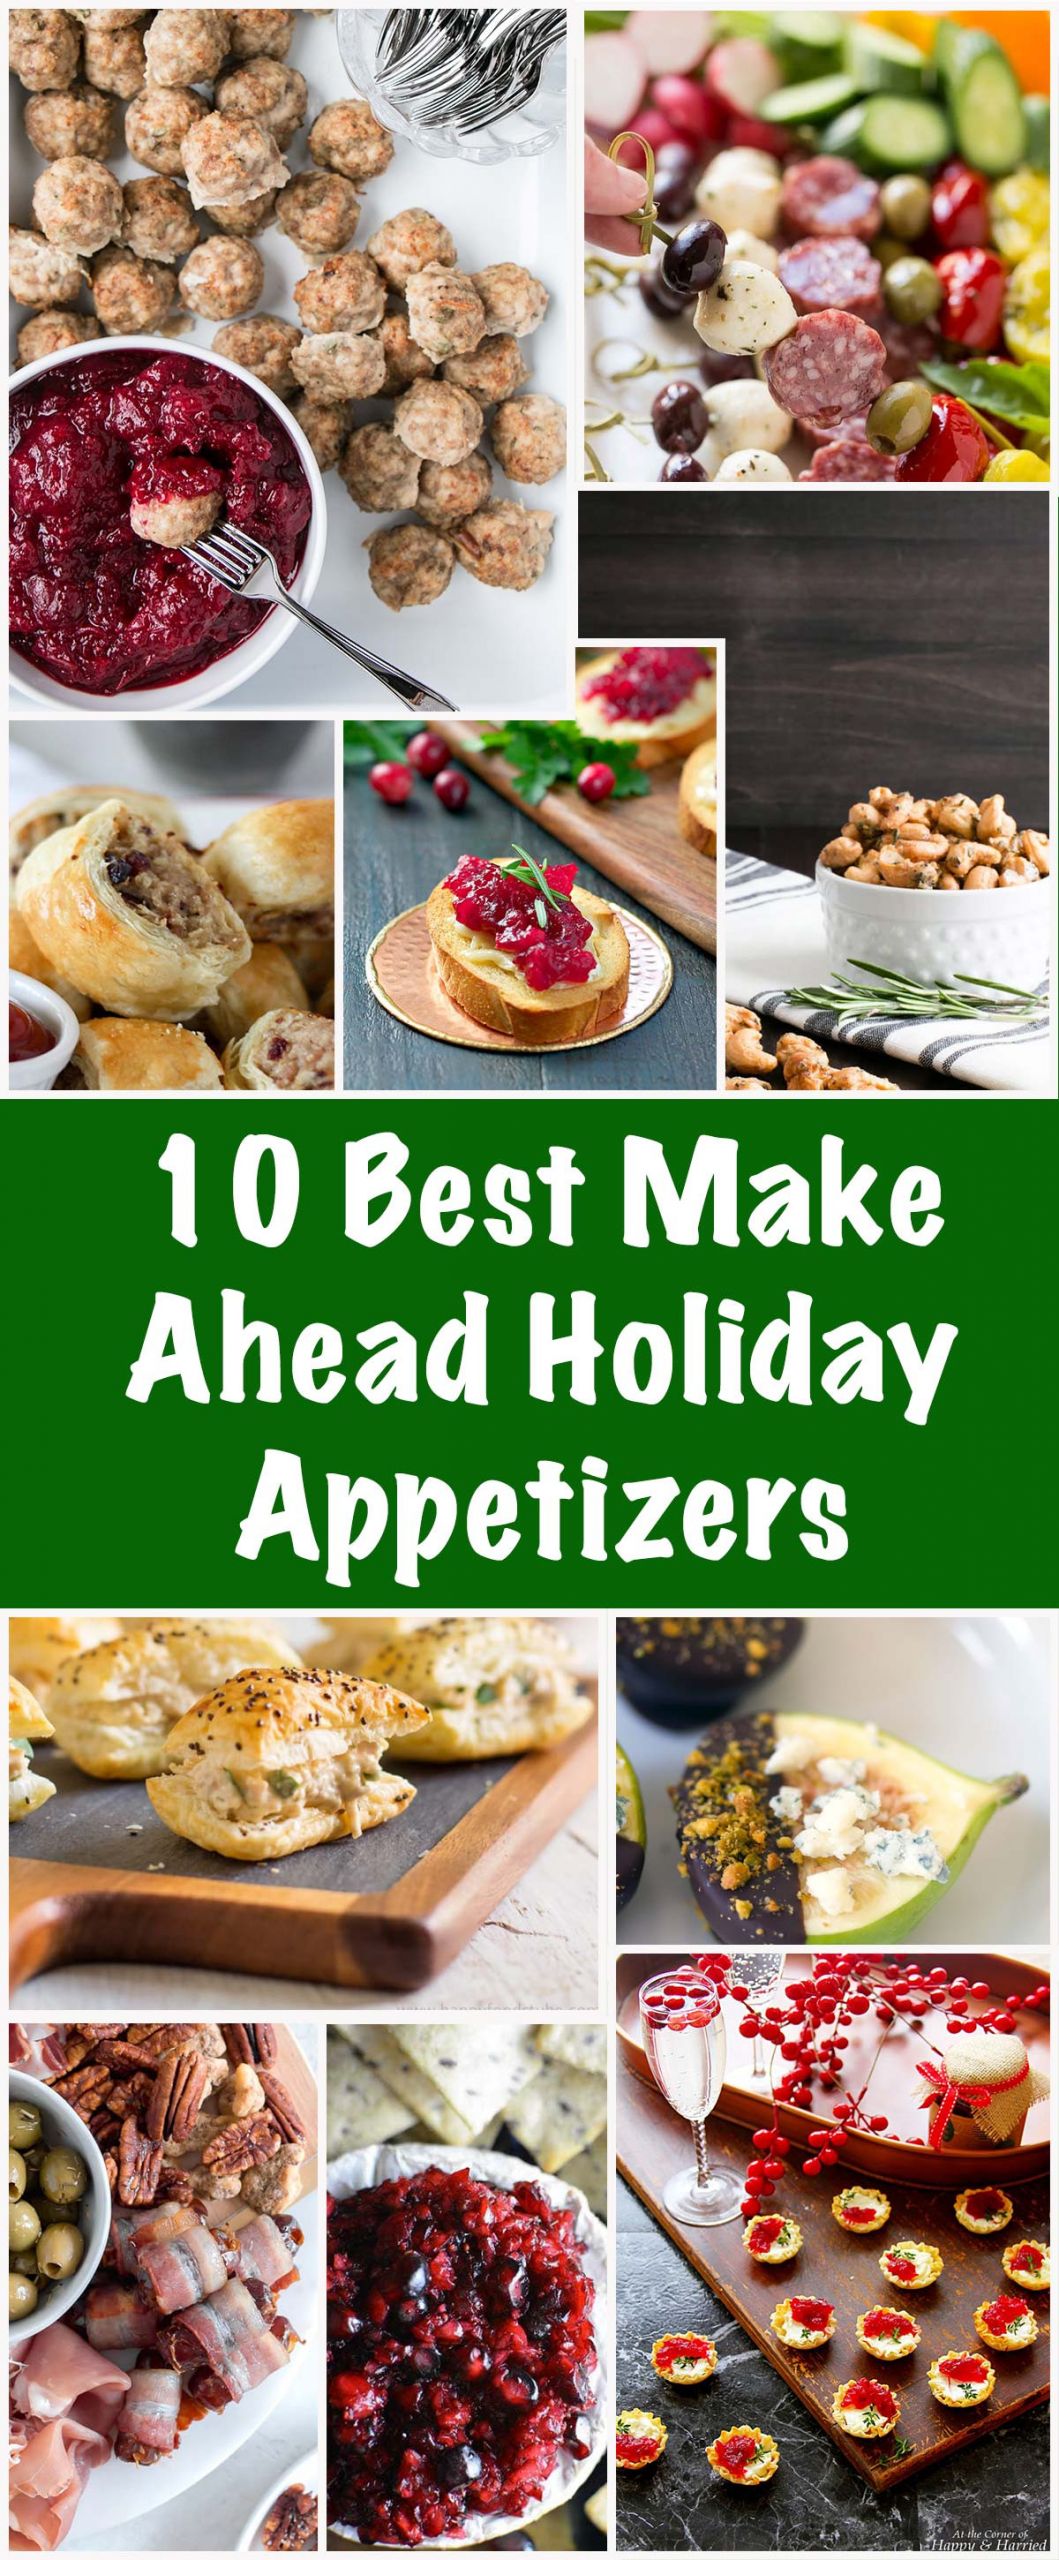 Top 30 Make Ahead Christmas Appetizers - Best Recipes Ideas and Collections